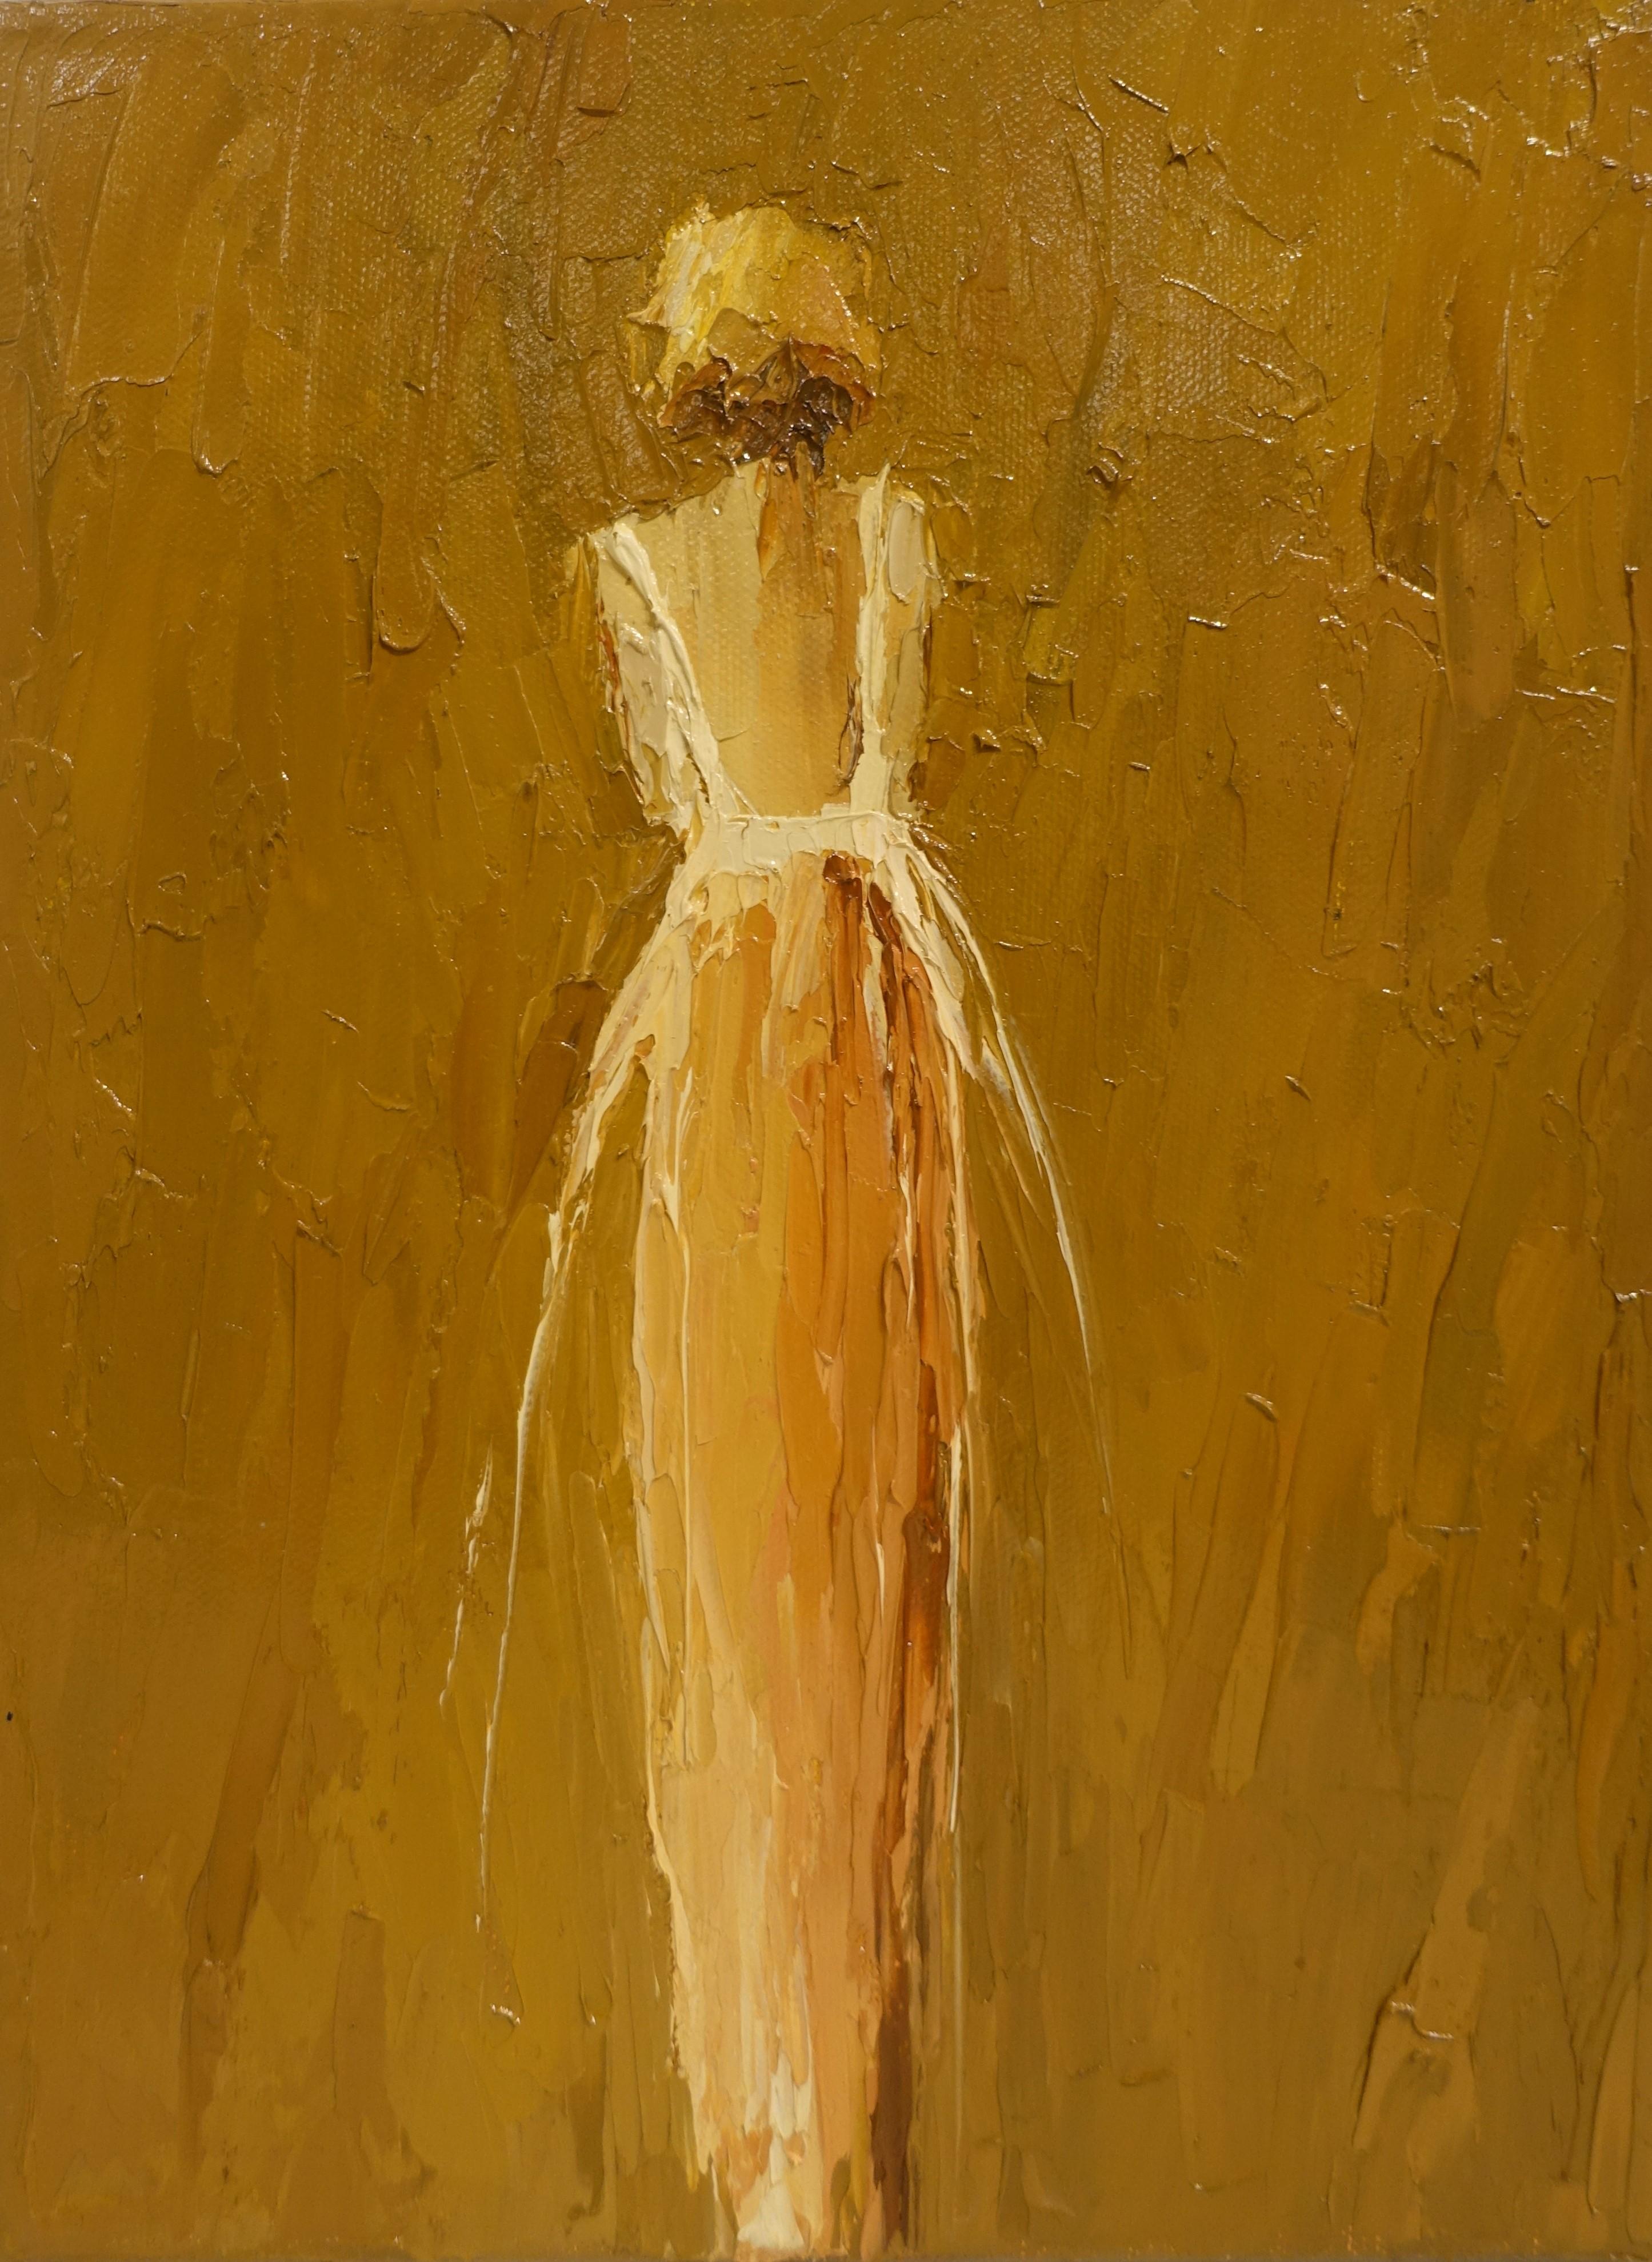 'Yvette II' is a petite framed Impressionist figurative oil on canvas painting created by American artist Geri Eubanks in 2019. Featuring a superb palette made of golden tones, the painting captures our hearts with its great presence. Painted on a